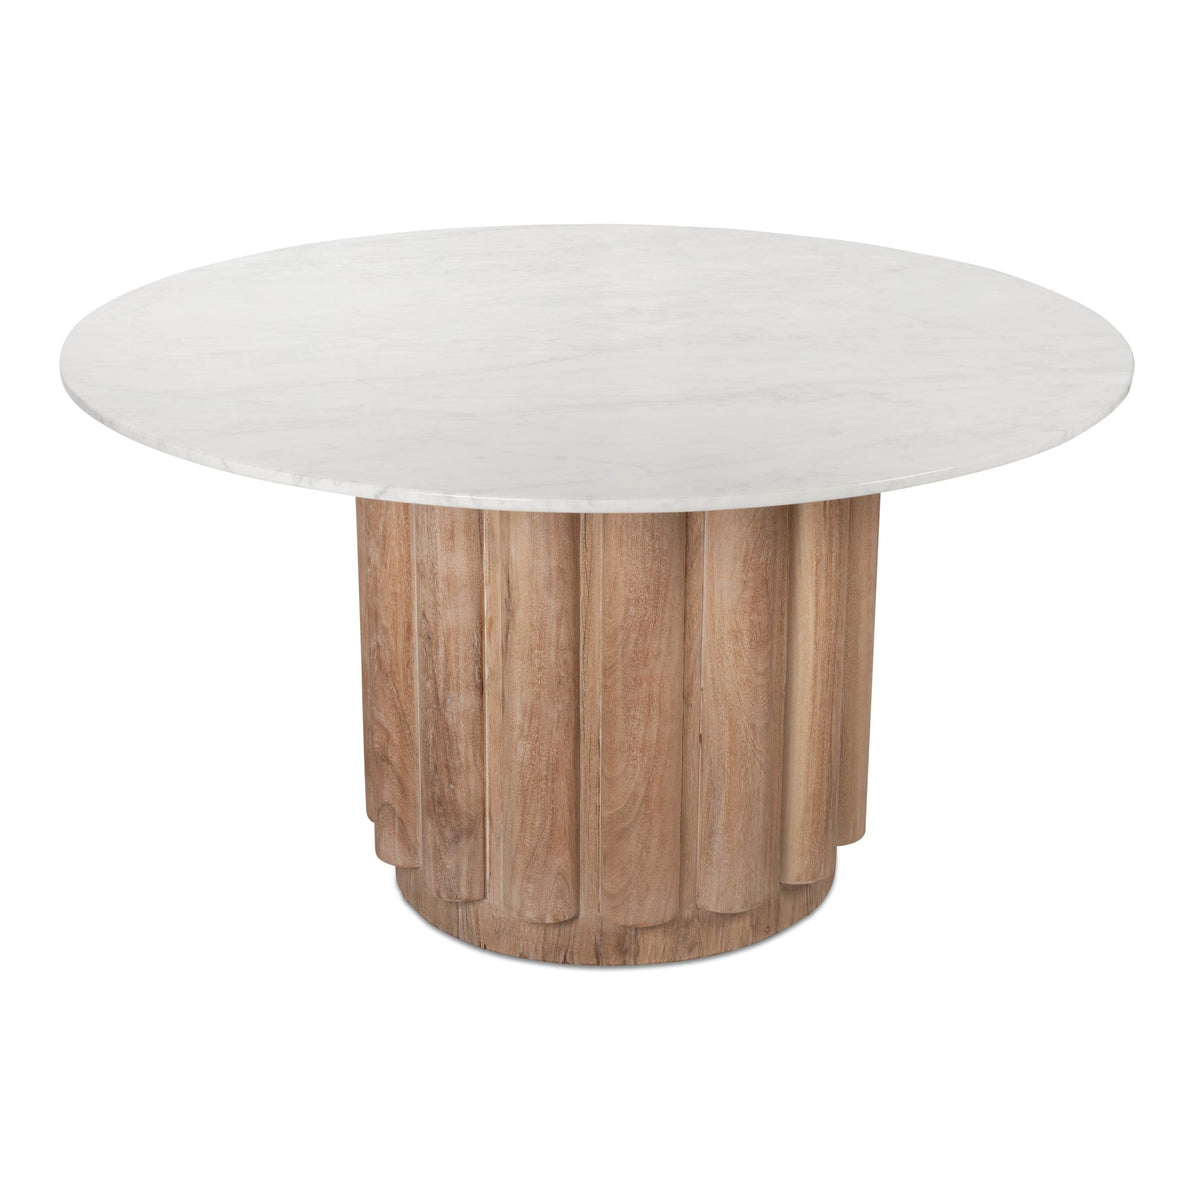 Eden Rock Dining Table in White Marble Top